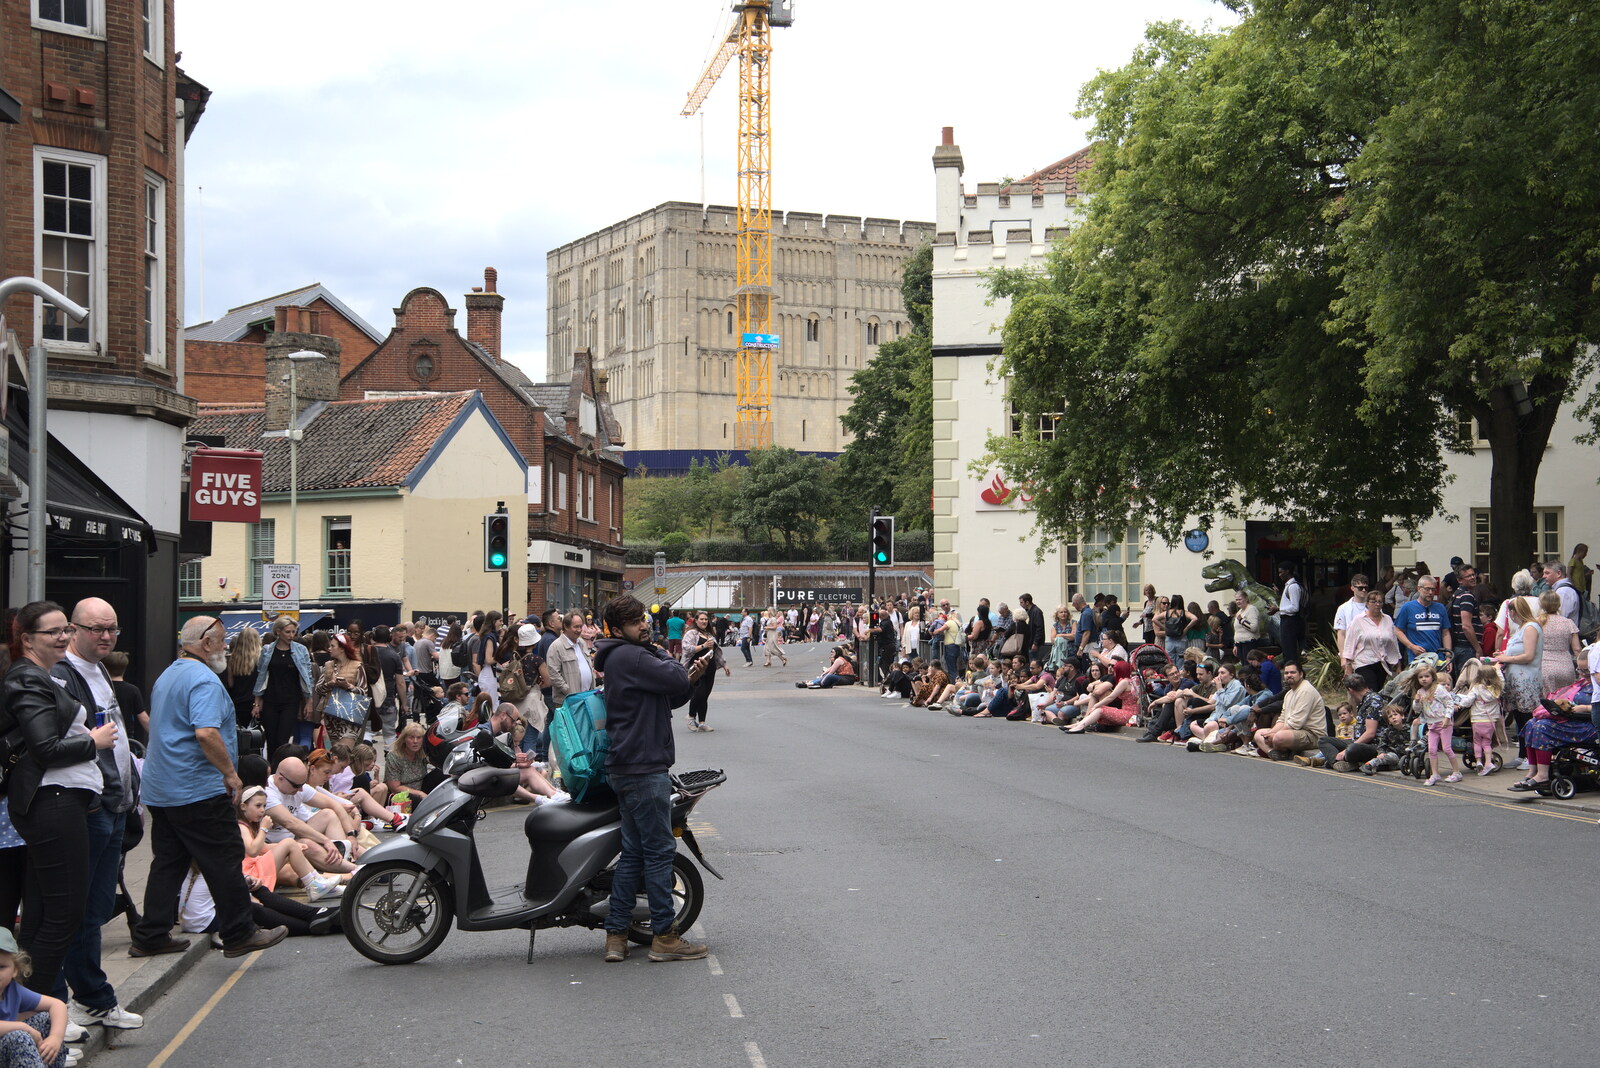 The view up to the castle from The Lord Mayor's Procession, Norwich, Norfolk - 2nd July 2022